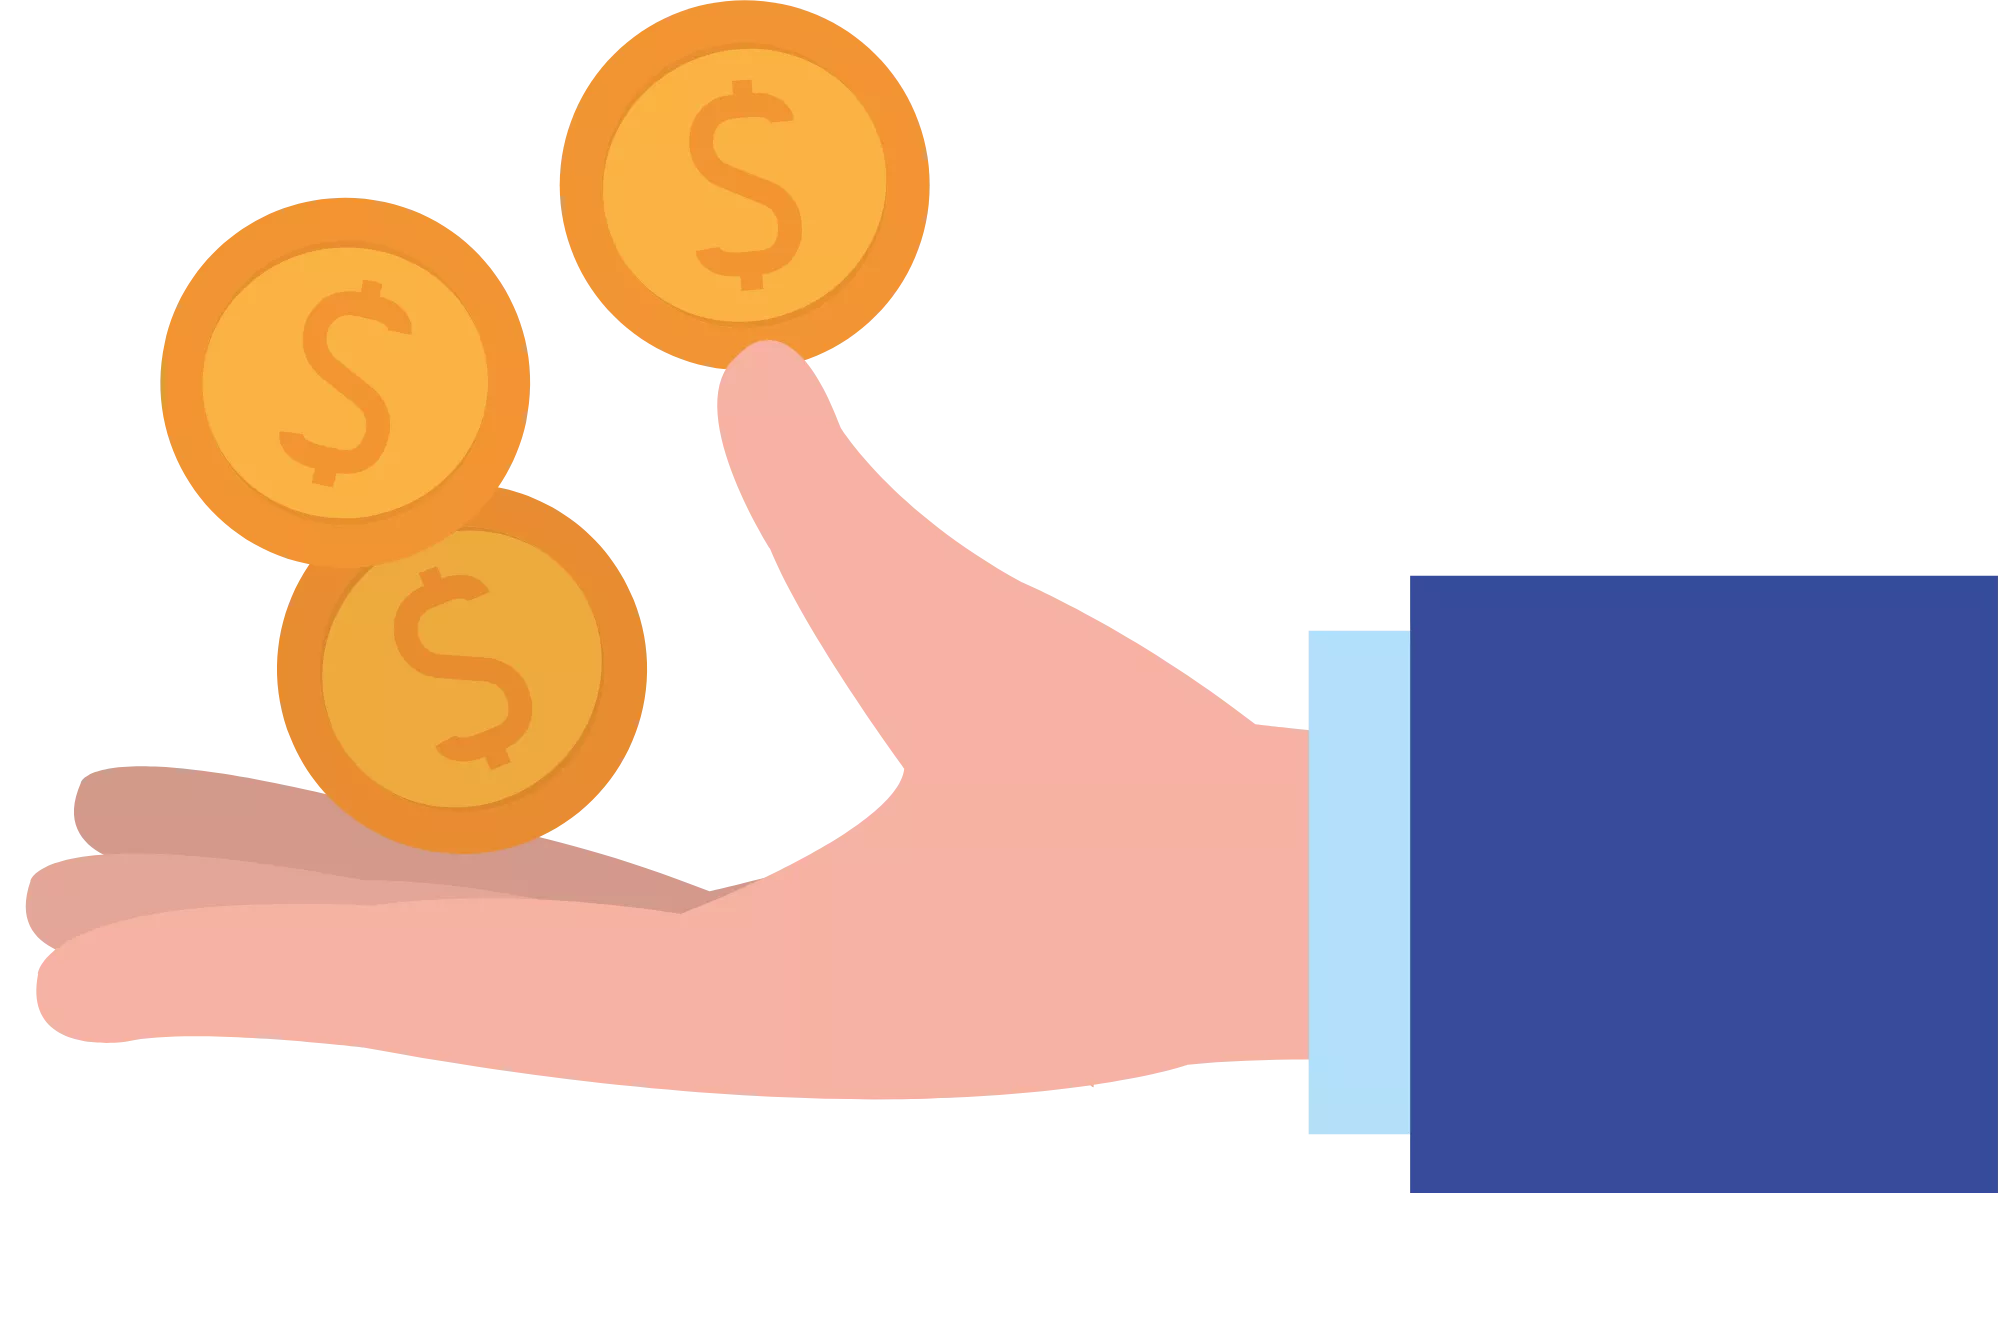 graphic icon of a hand holding coins to represent ebay payment dispute fees